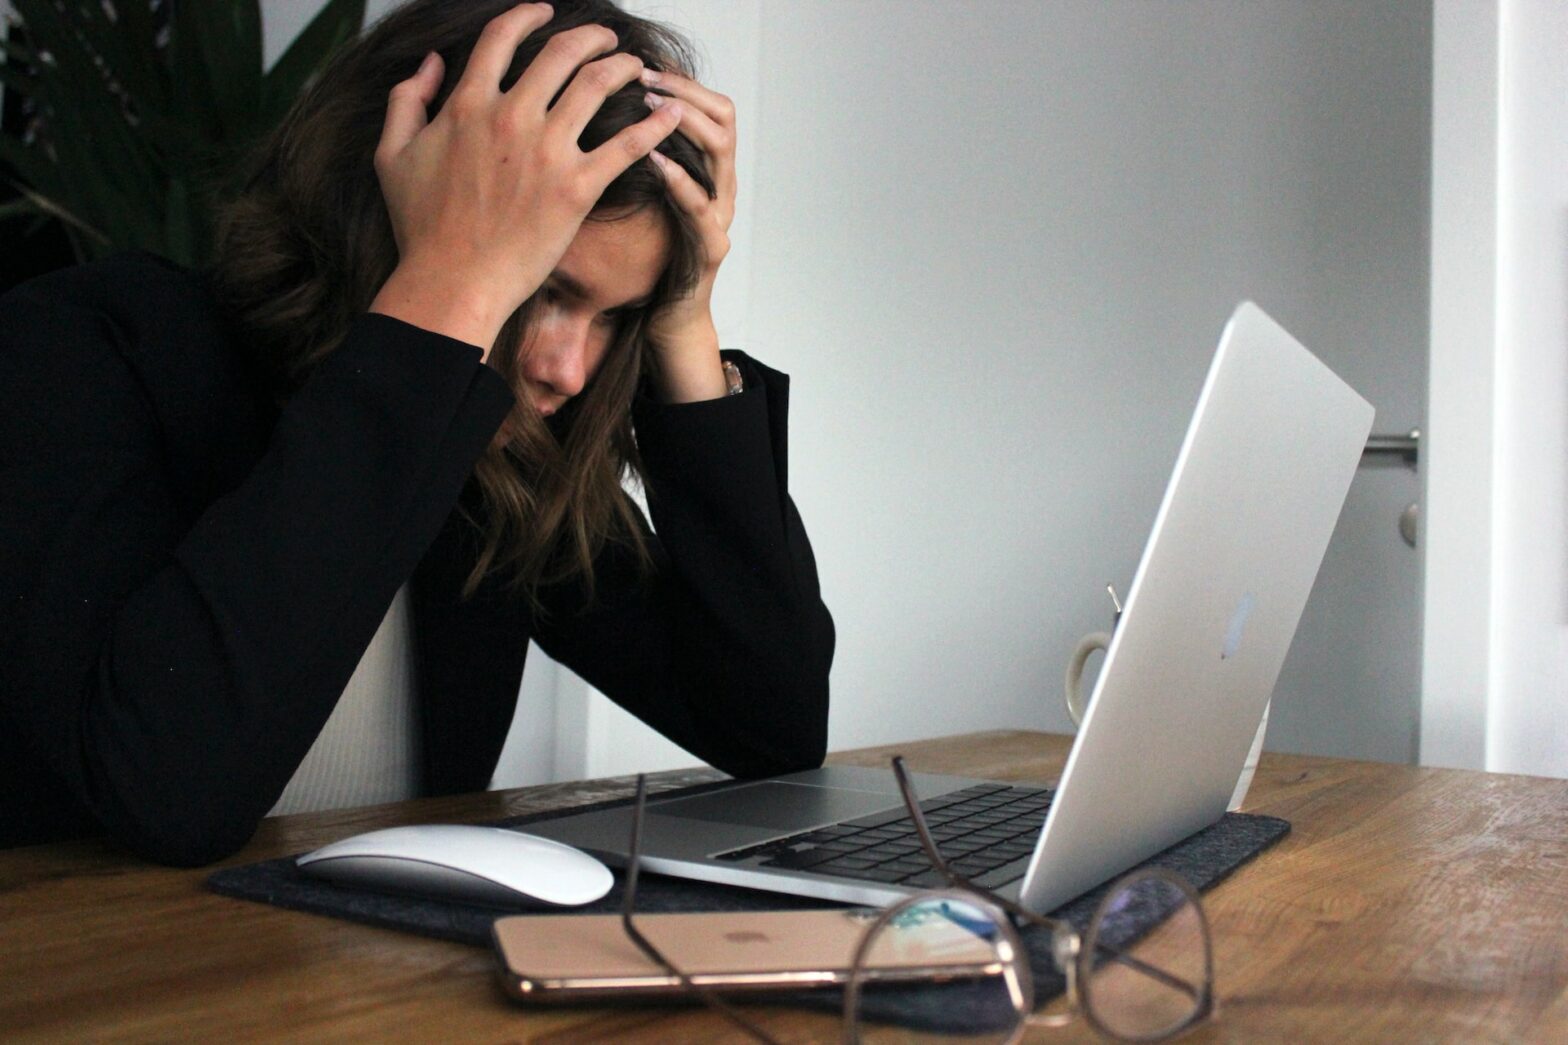 A woman sitting in front of a laptop with her head in her hands in a frustrated posture.